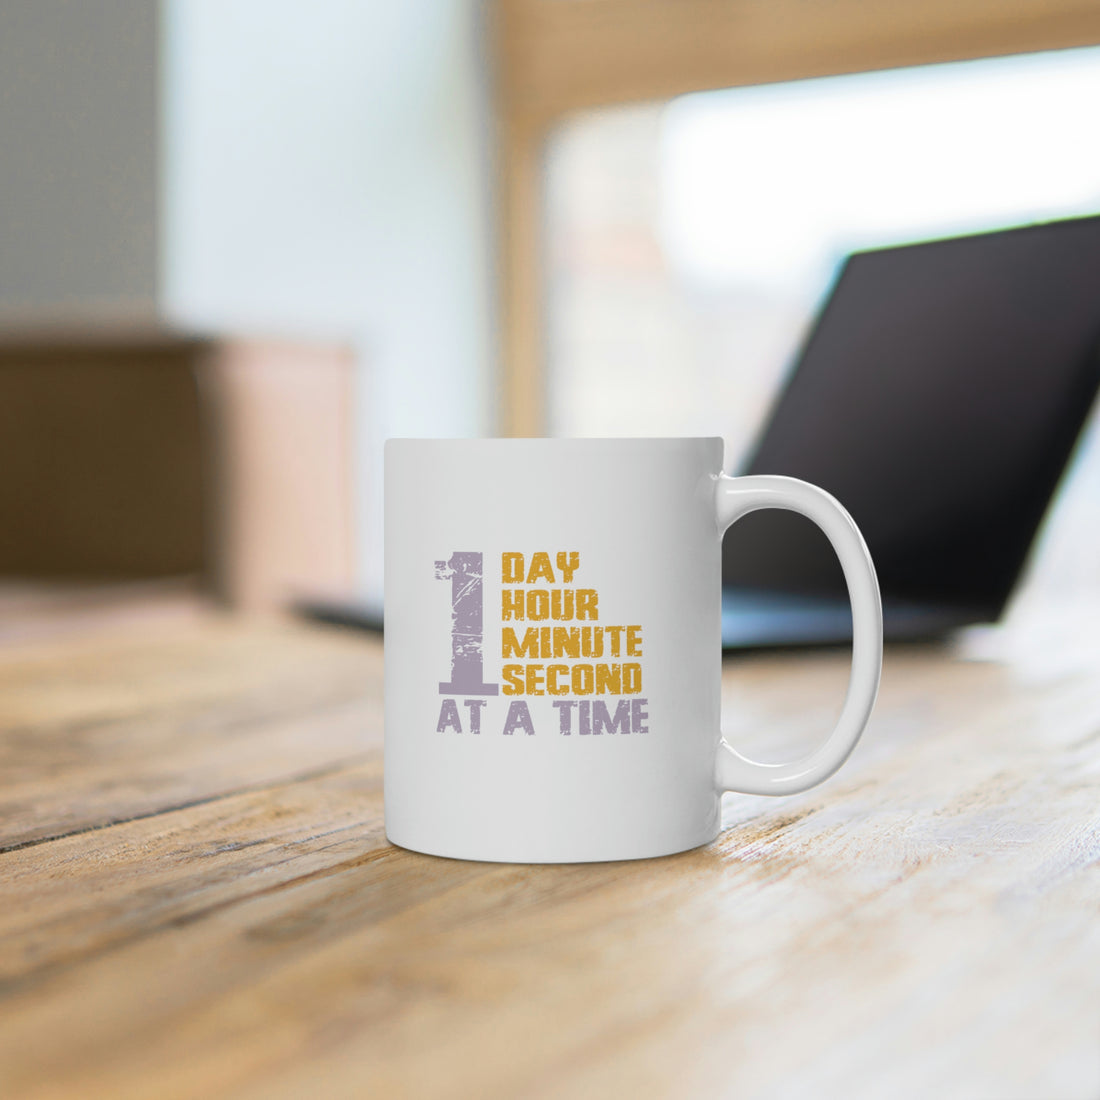 1 Day Hour Minute Second At A Time - White Ceramic Mug 2 sizes Available